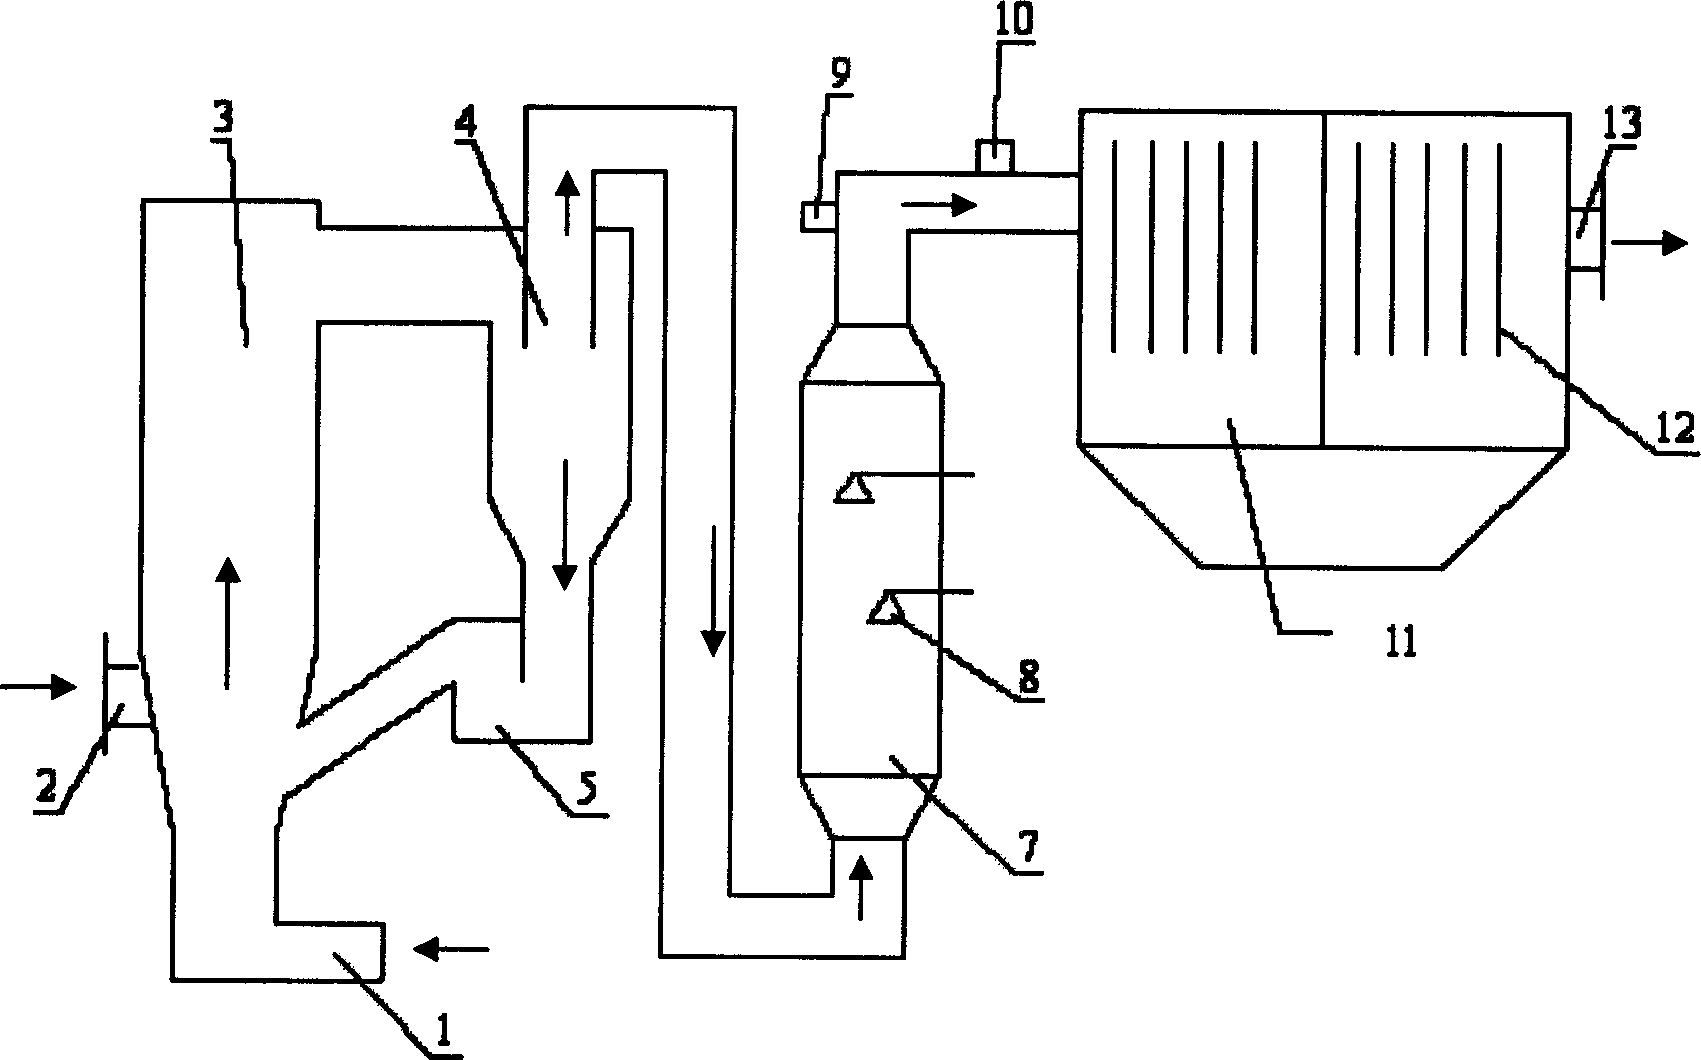 Integrated plant of circulating fluid bed type boiler for burnning garbage and purifying tail gas